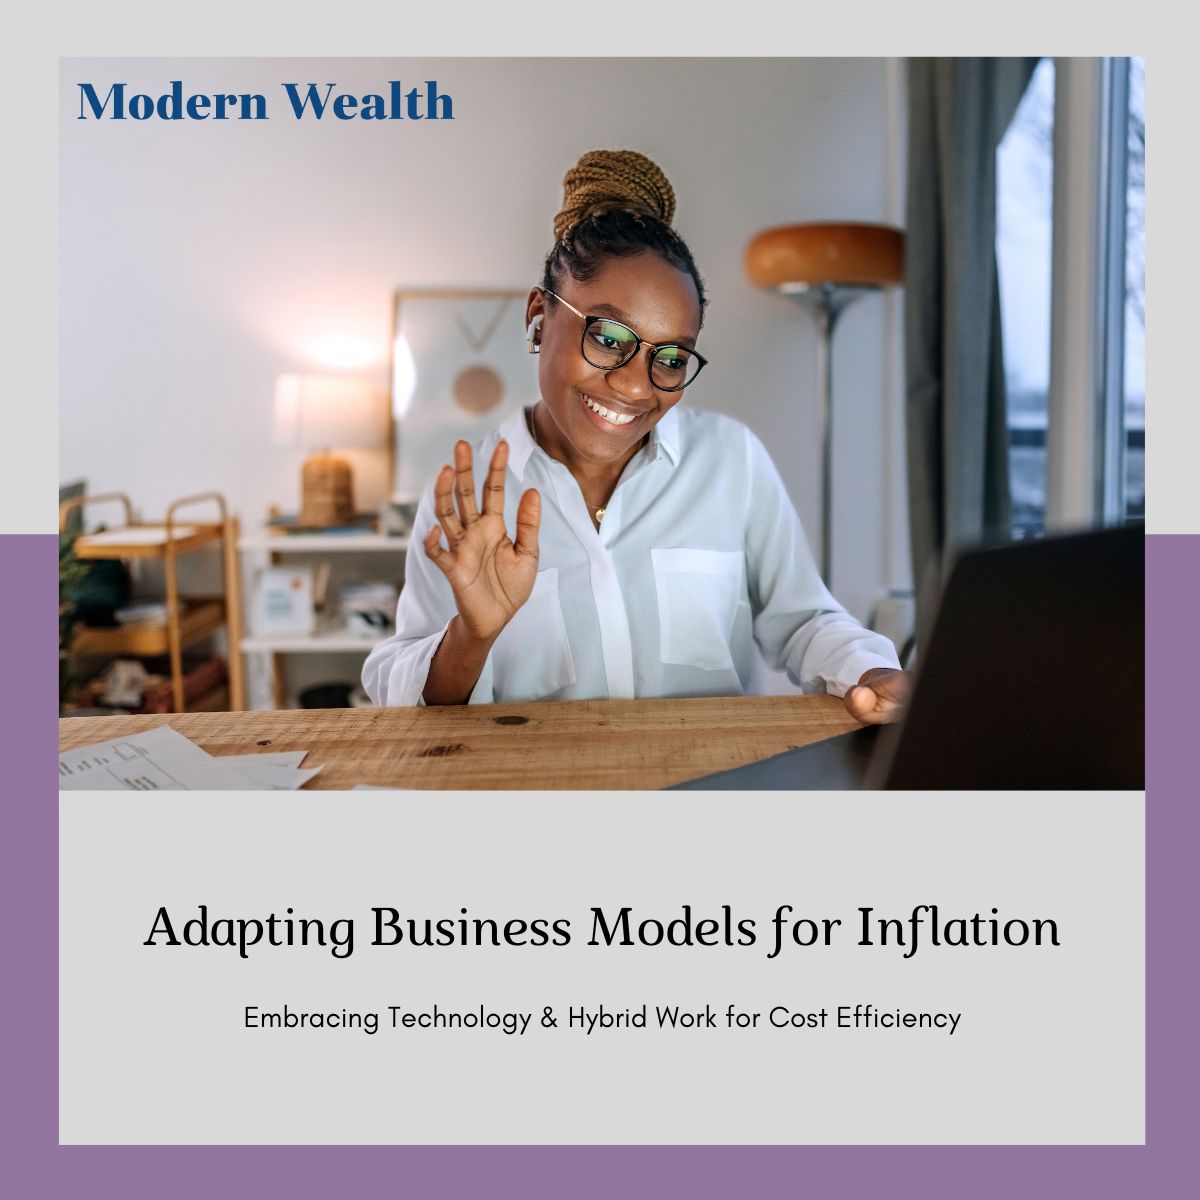 Adapting Business Models: Inflation demands new business strategies. To mitigate costs, embrace technology and hybrid work models. Find out how to adapt. 

buff.ly/4a9CPdJ 

#BusinessInnovation #OperationalEfficiency #ModernWealth